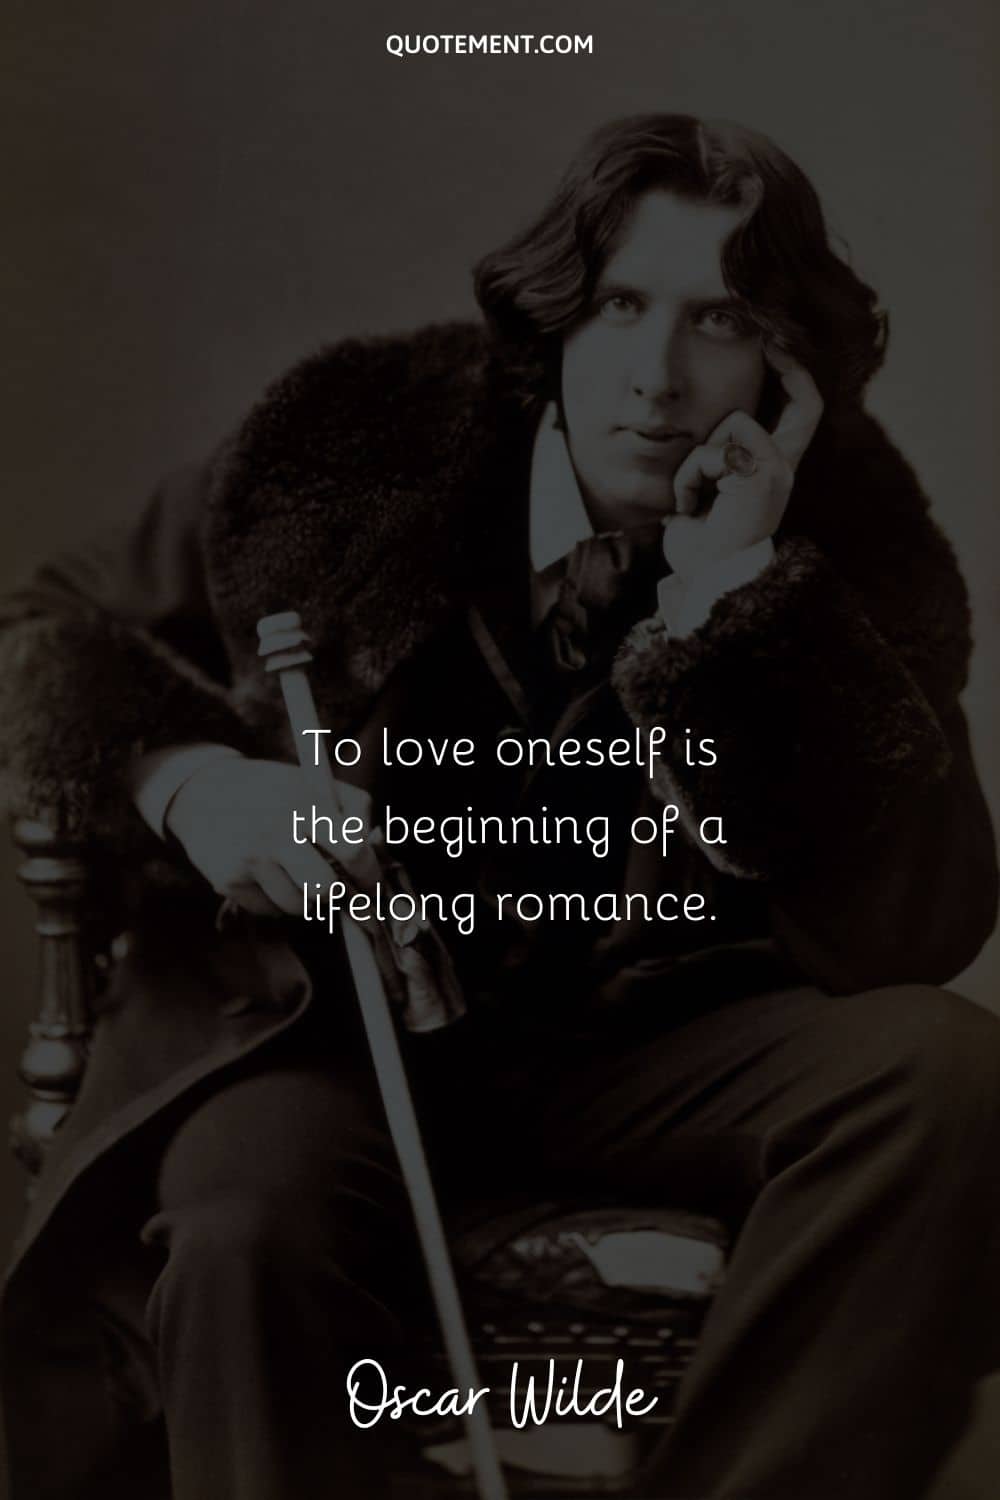 “To love oneself is the beginning of a lifelong romance.”